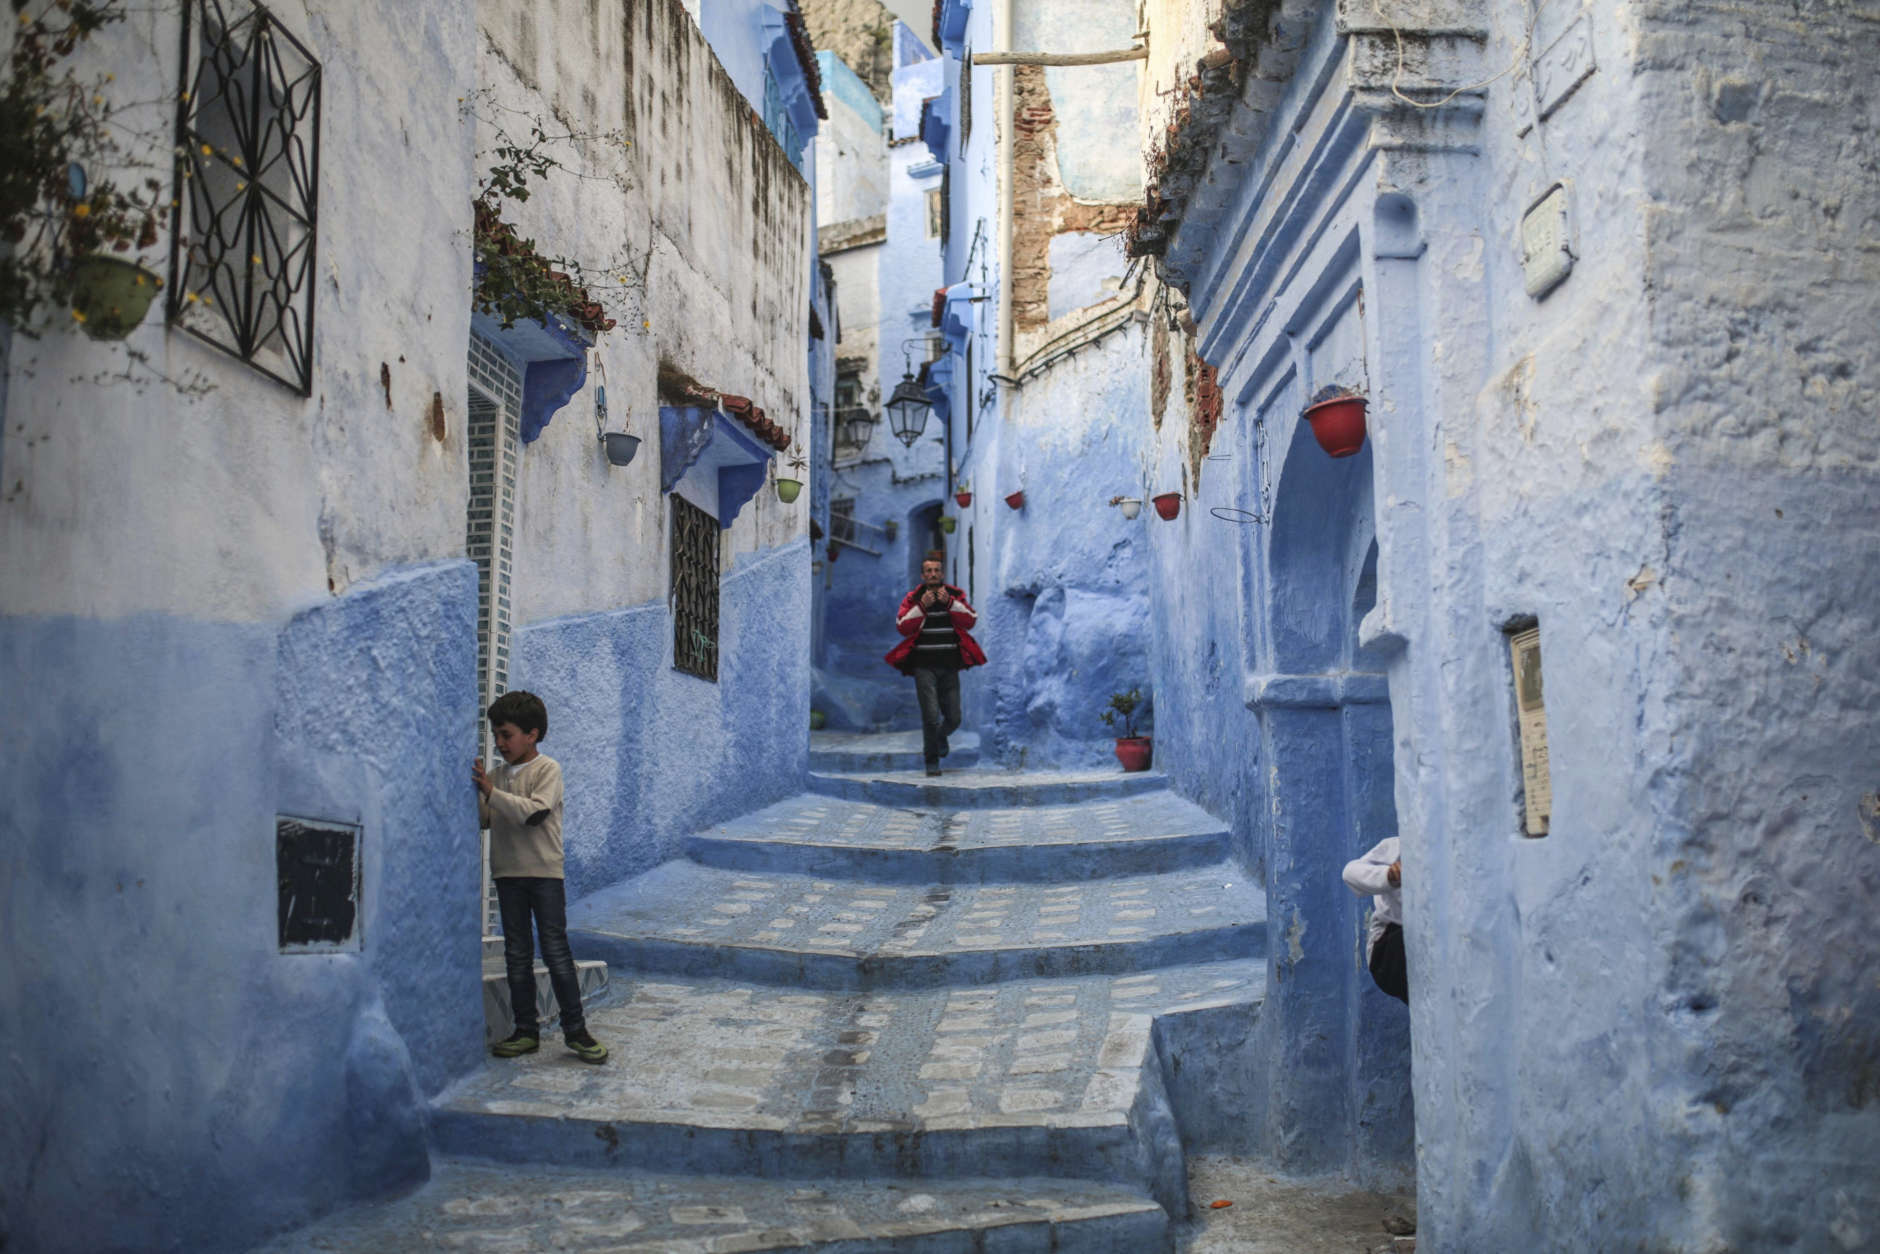 A boy plays outside his house while a man walks down an alleyway in the Medina of Chefchaouen, a picturesque town well-known for its blue painted houses and alleyways, in northern Morocco, Saturday, April 29, 2017. (AP Photo/Mosa'ab Elshamy)